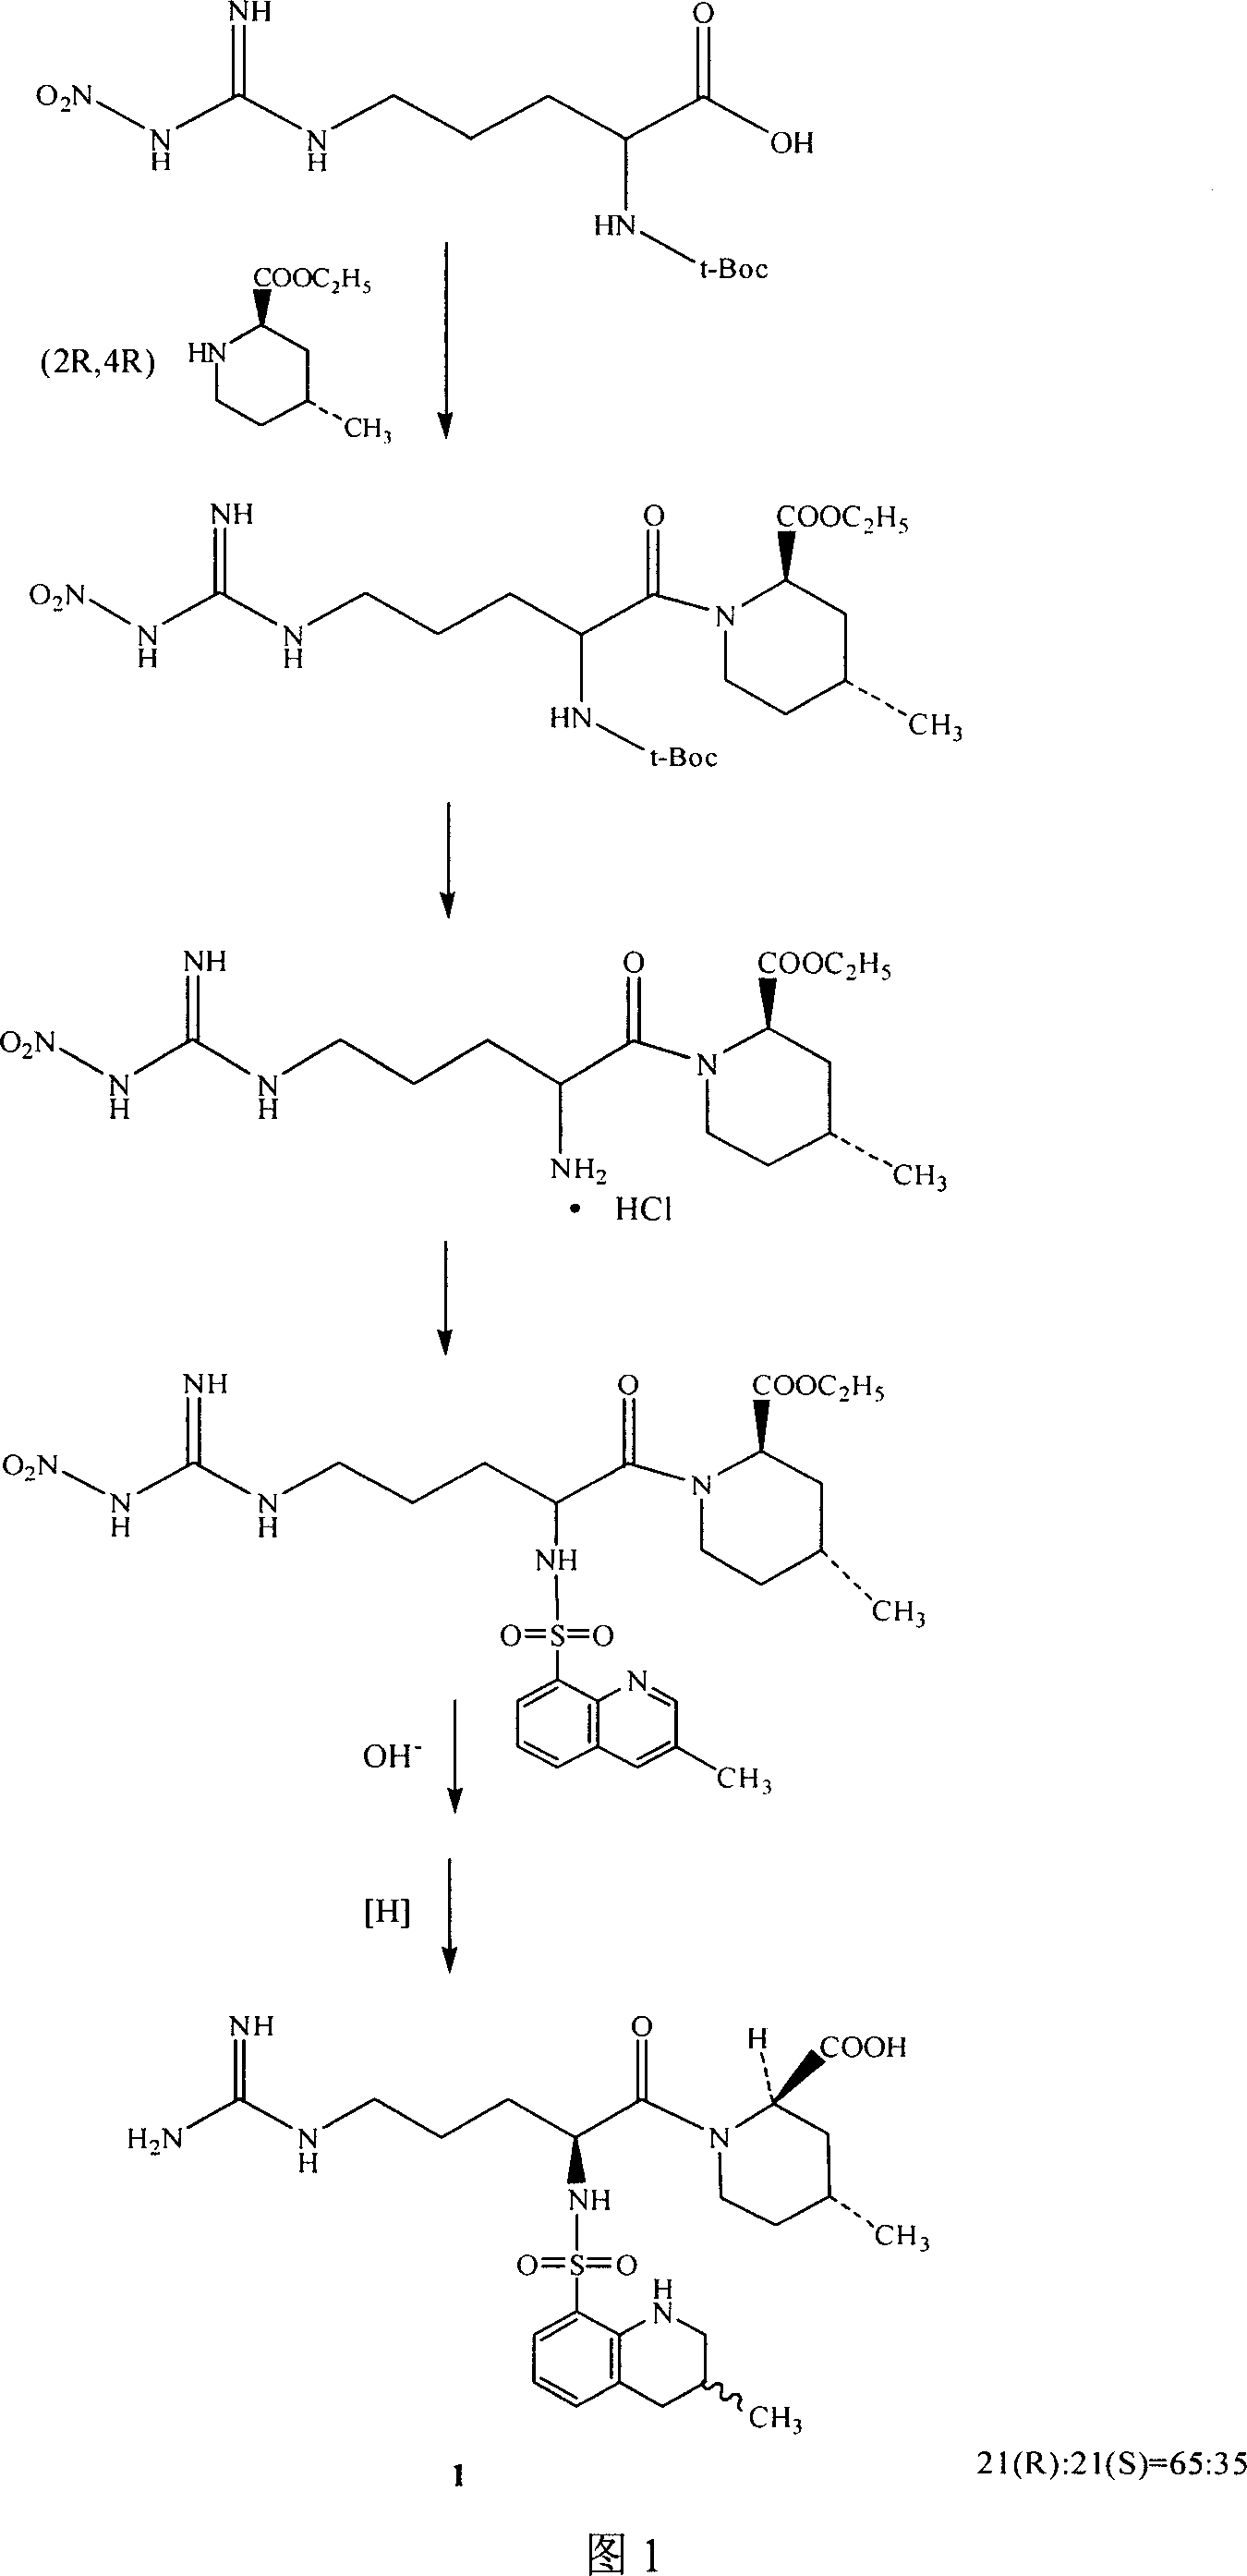 Argatroban byproduct and its synthesis, separation and identification method